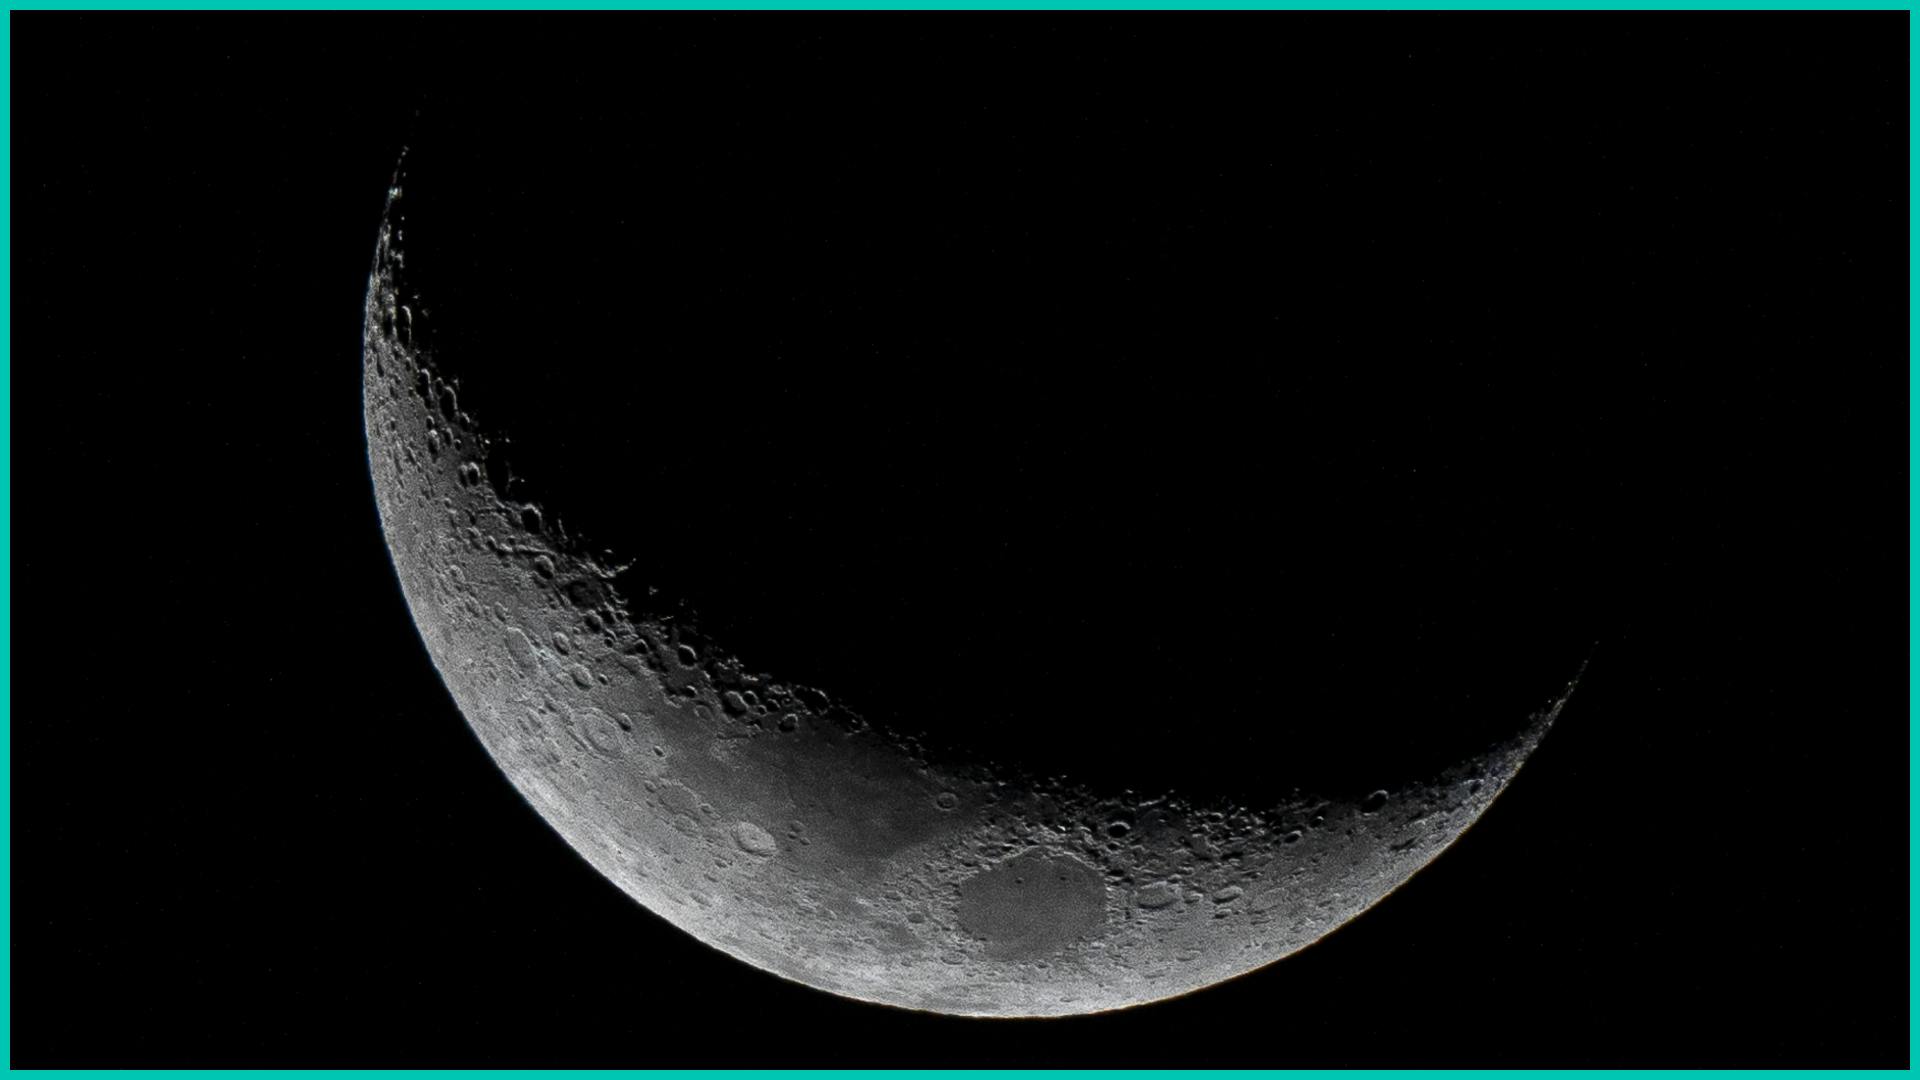 The waxing crescent moon.